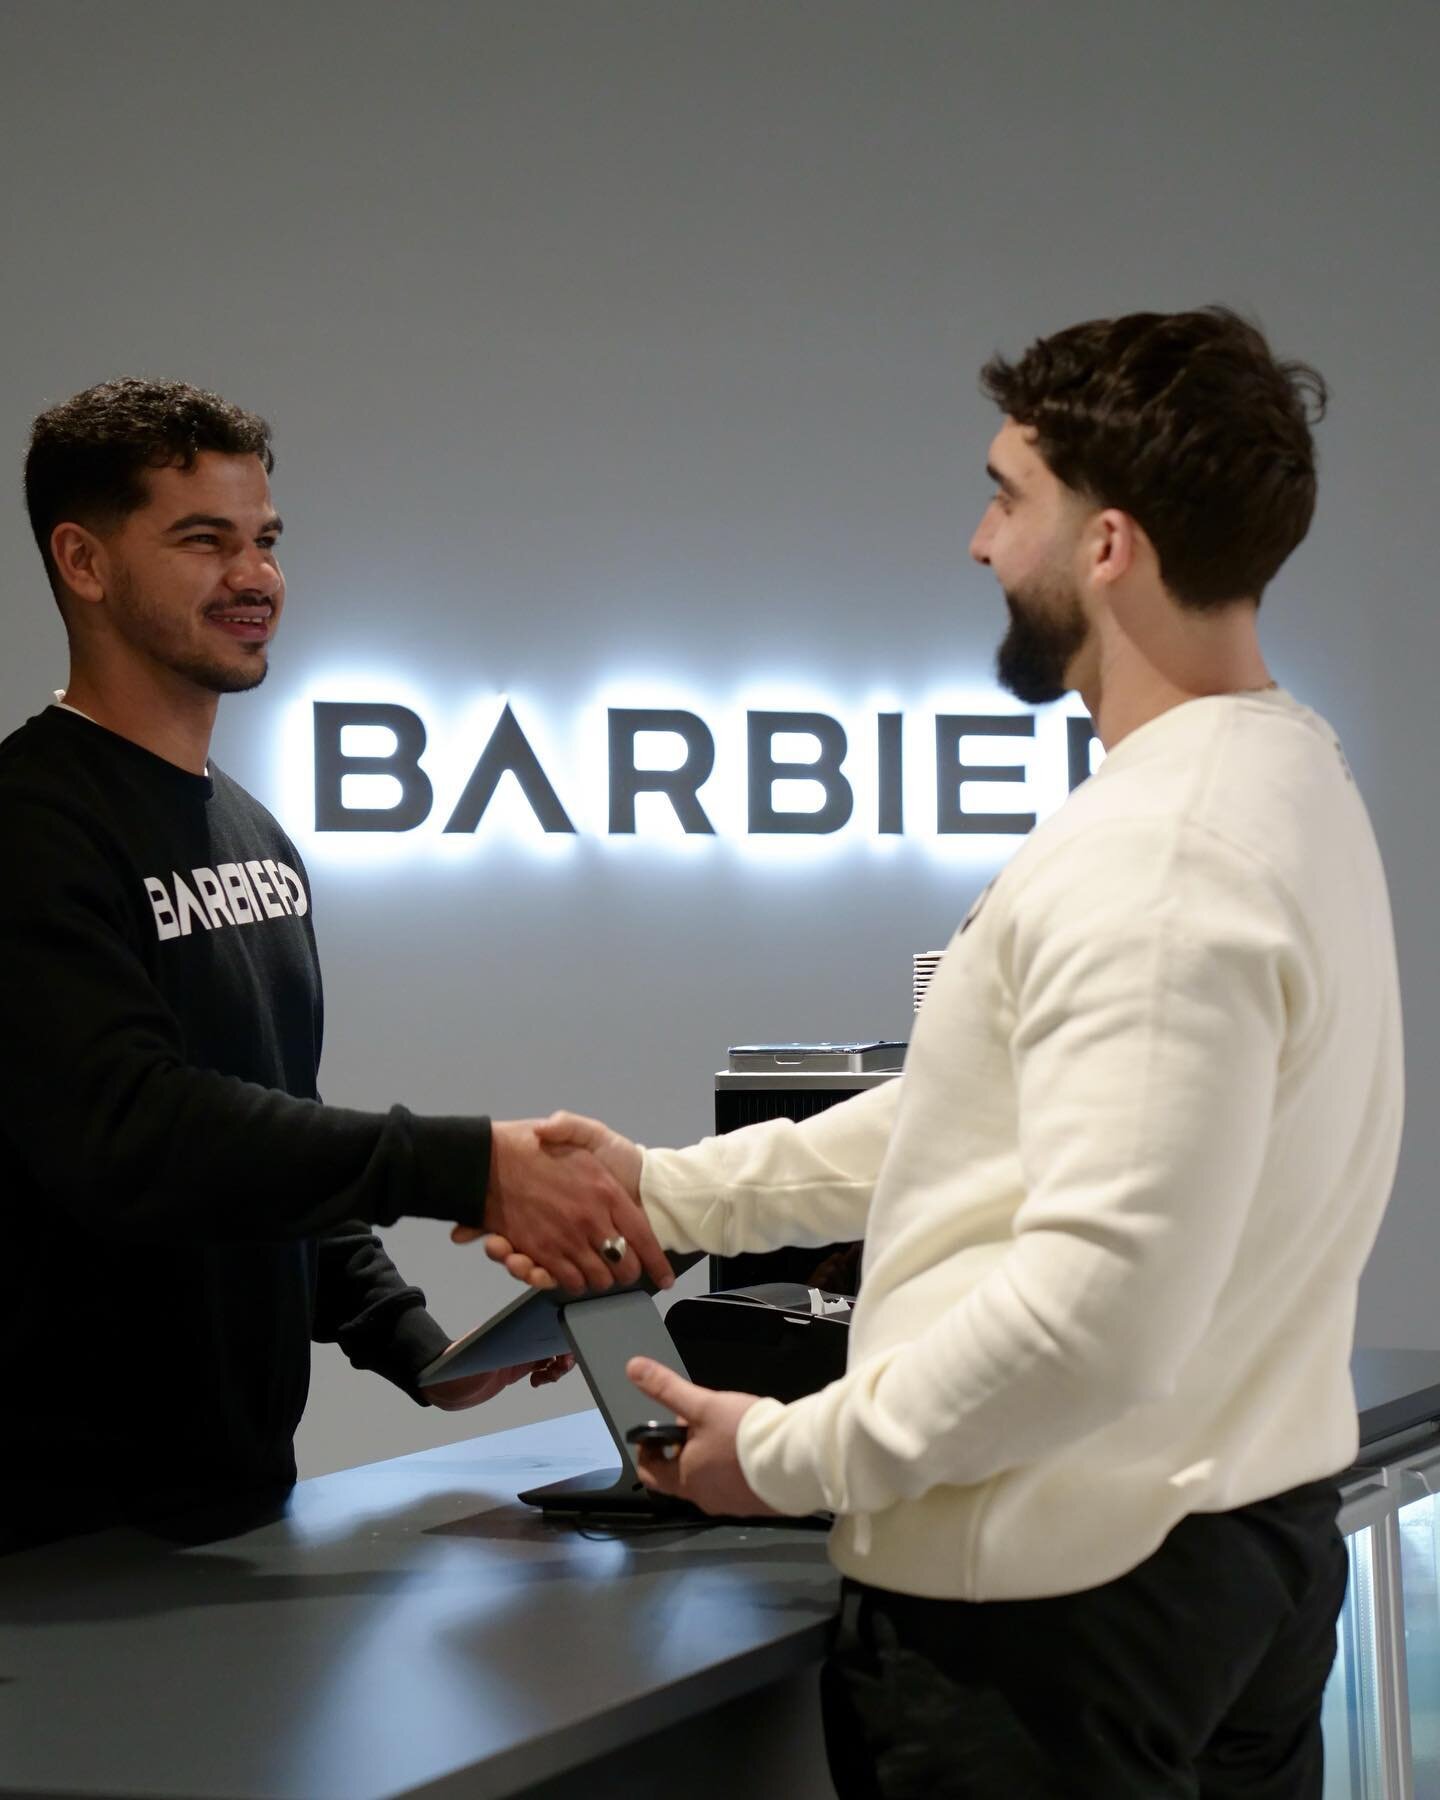 A great day starts with a haircut, but it's the relationship you develop with your barber that makes it memorable.

Here at BARBIERO, we place high value on the client / barber relationship. We enjoy connecting with our clients on a personal level to